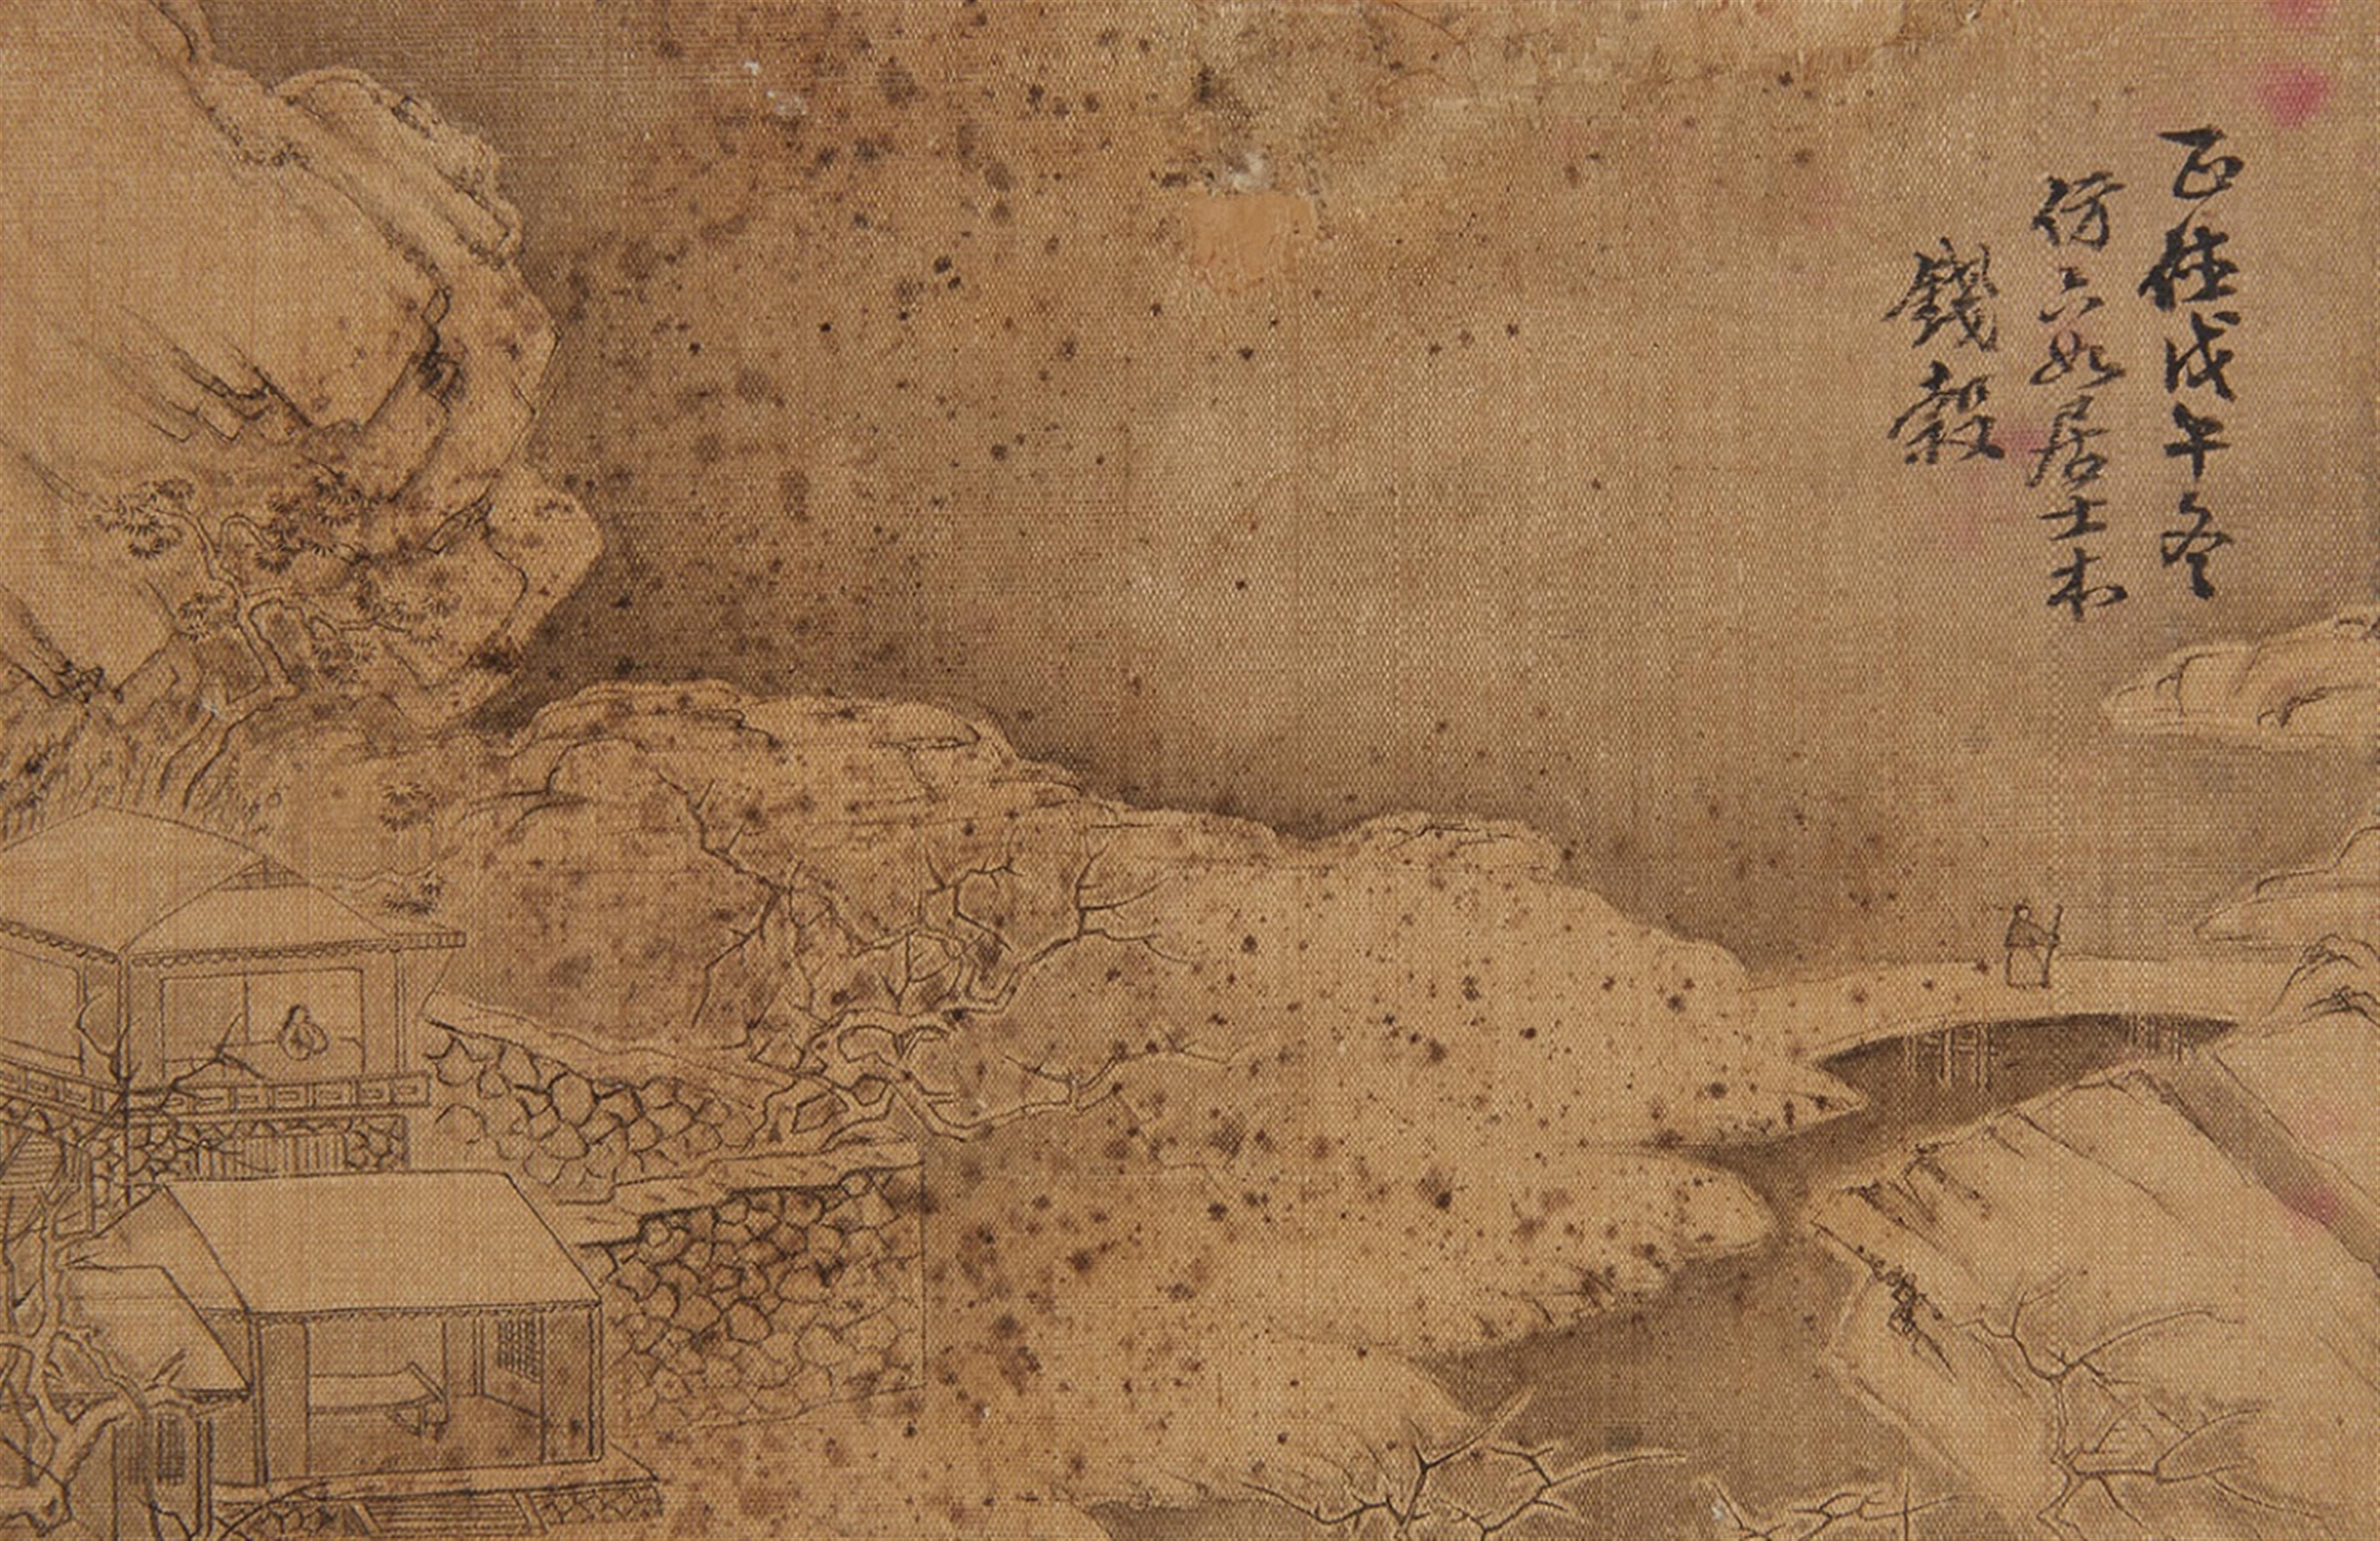 Qian Gu, in the manner of - An album titled "Ming Qian Gu shanshui ce" with six double-leaves, depicting landscapes in the manner of Qian Gu (1508-1578). Water damages. Cloth-covered covers. - image-1